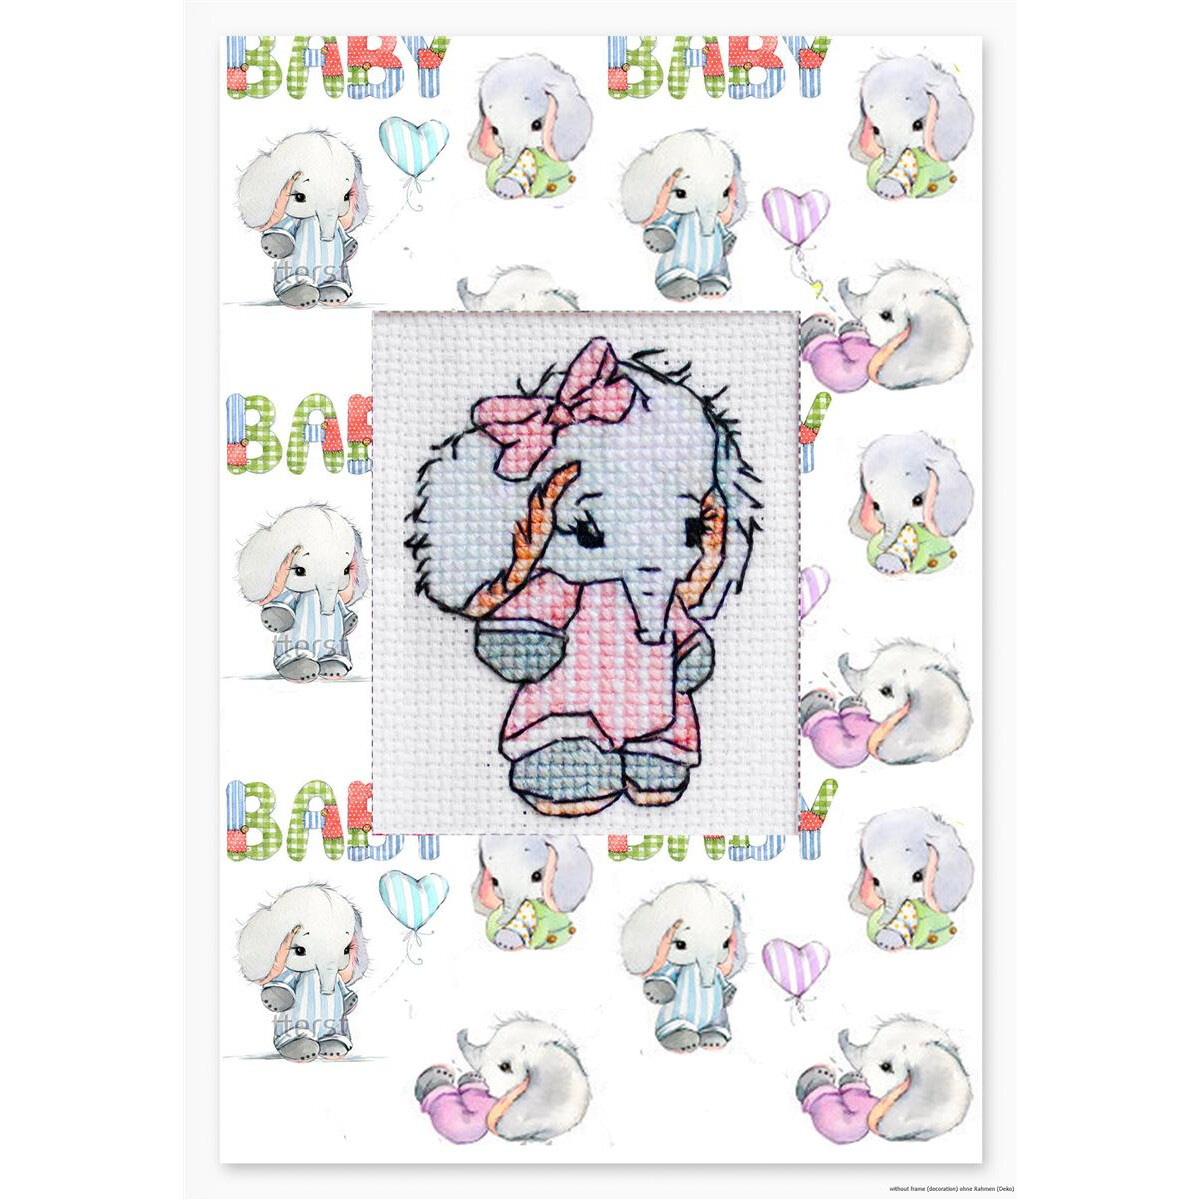 Luca-S counted Cross Stitch kit Postcard "Baby...